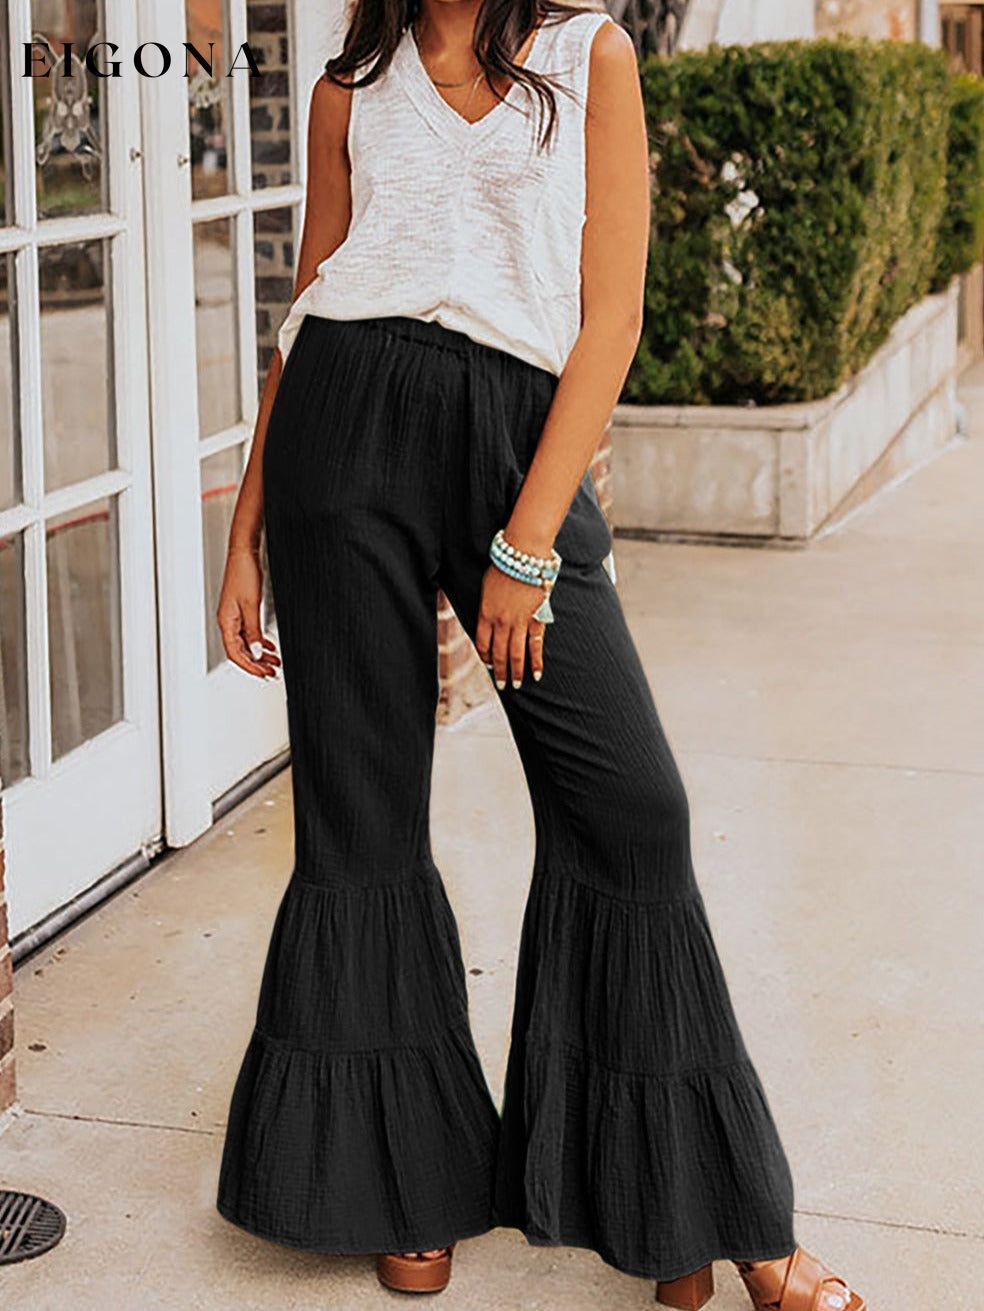 Black Textured High Waist Ruffled Bell Bottom Pants All In Stock bottoms clothes Fabric Linen Occasion Daily pants Print Solid Color ruffles bell pants Season Spring Silhouette Flare Style Western